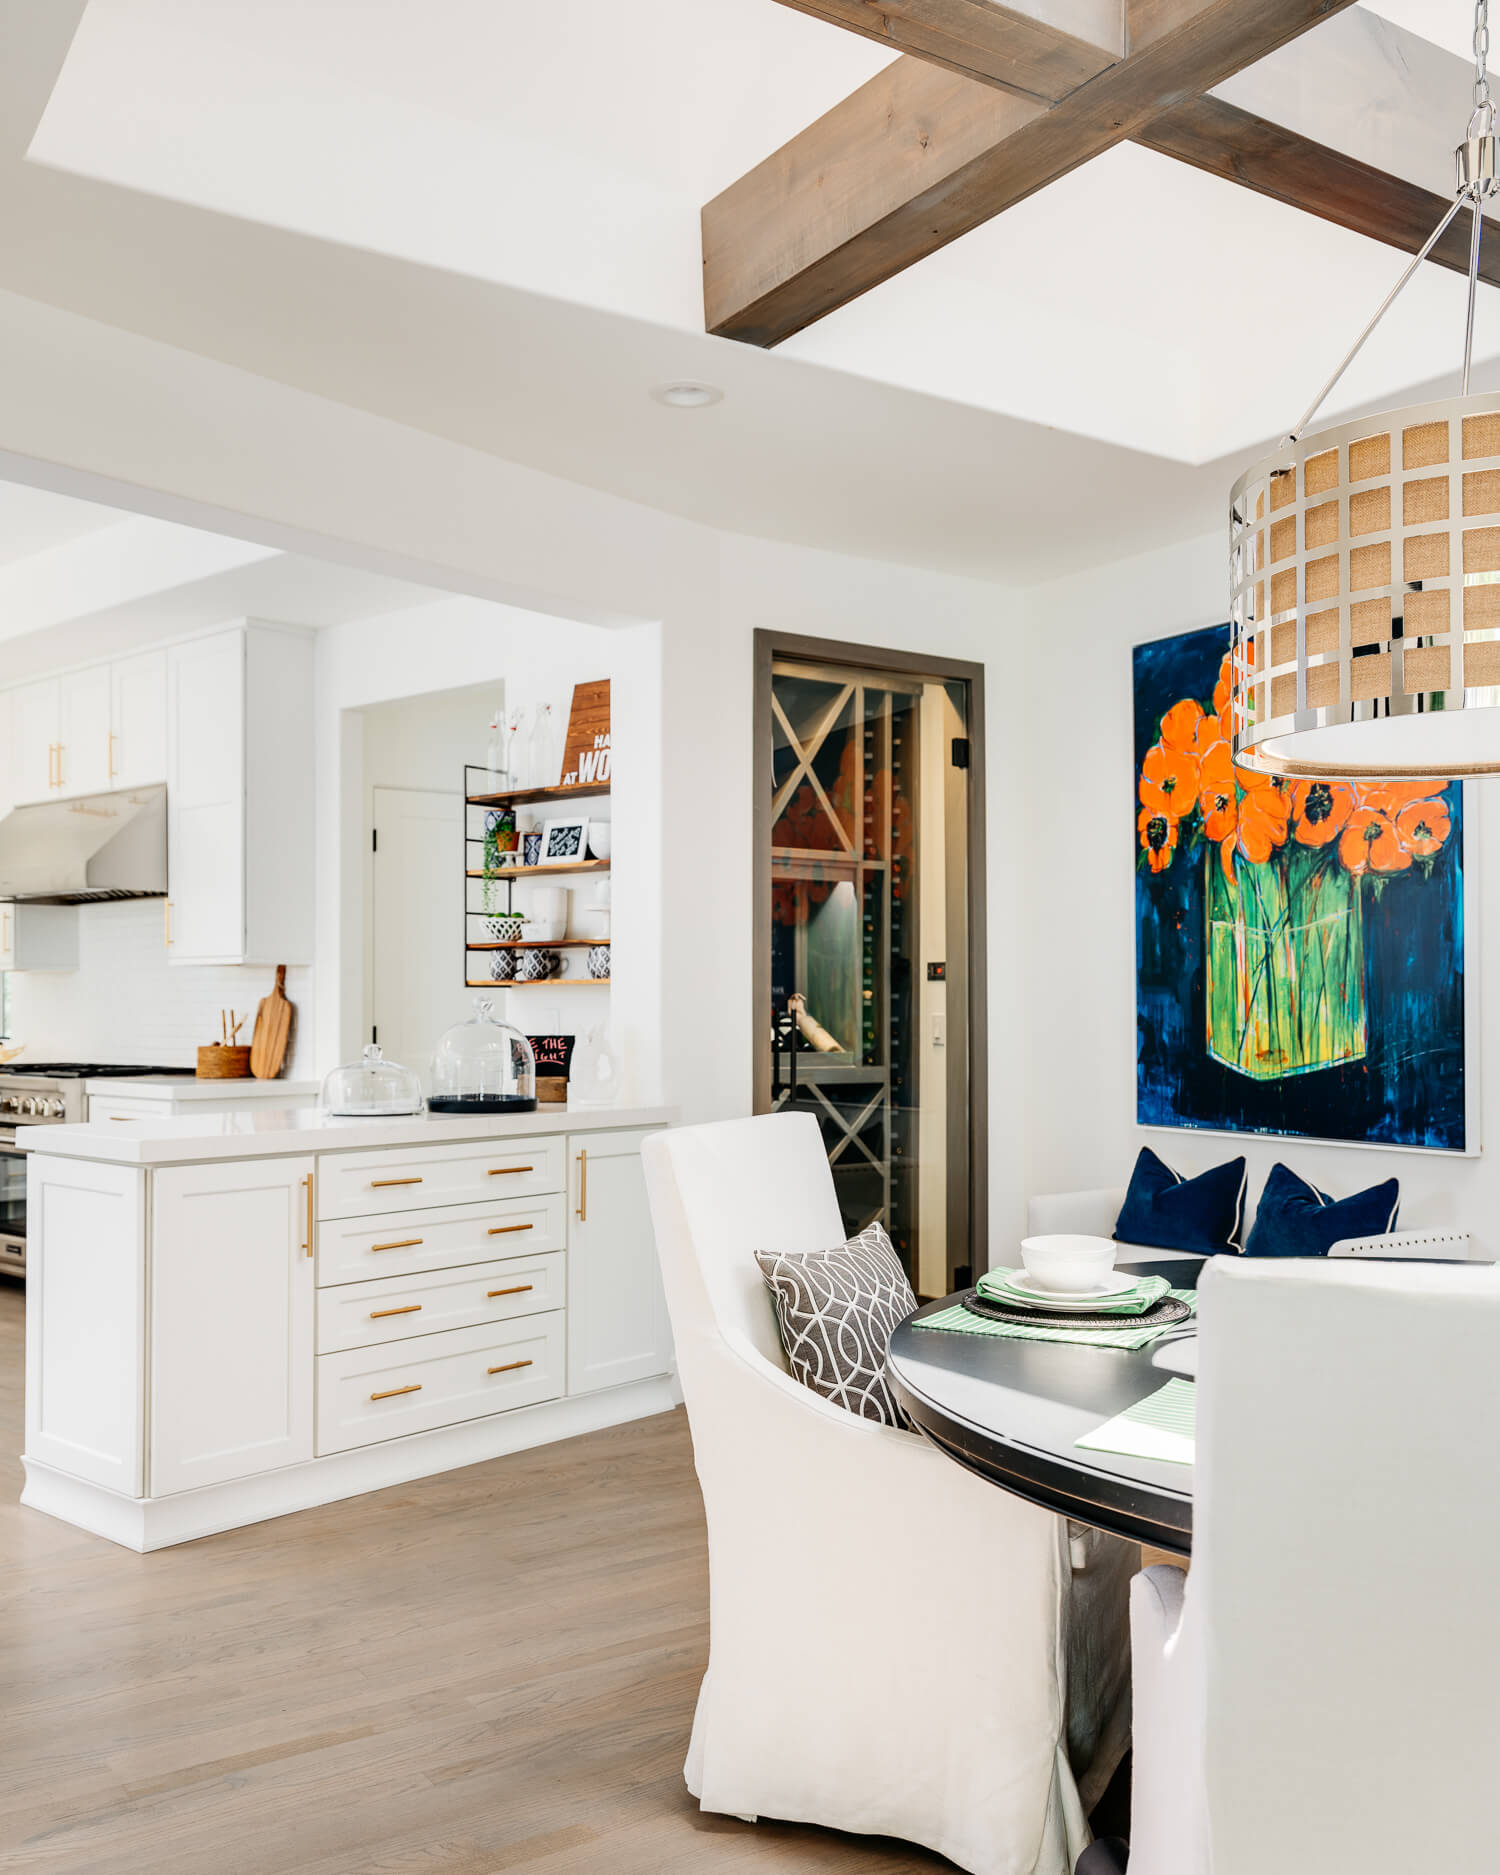 A luxurious kitchen and dining room design with access to a walk-in wine room. The white painted cabinets are bright and beautiful with the gold hardware accents.